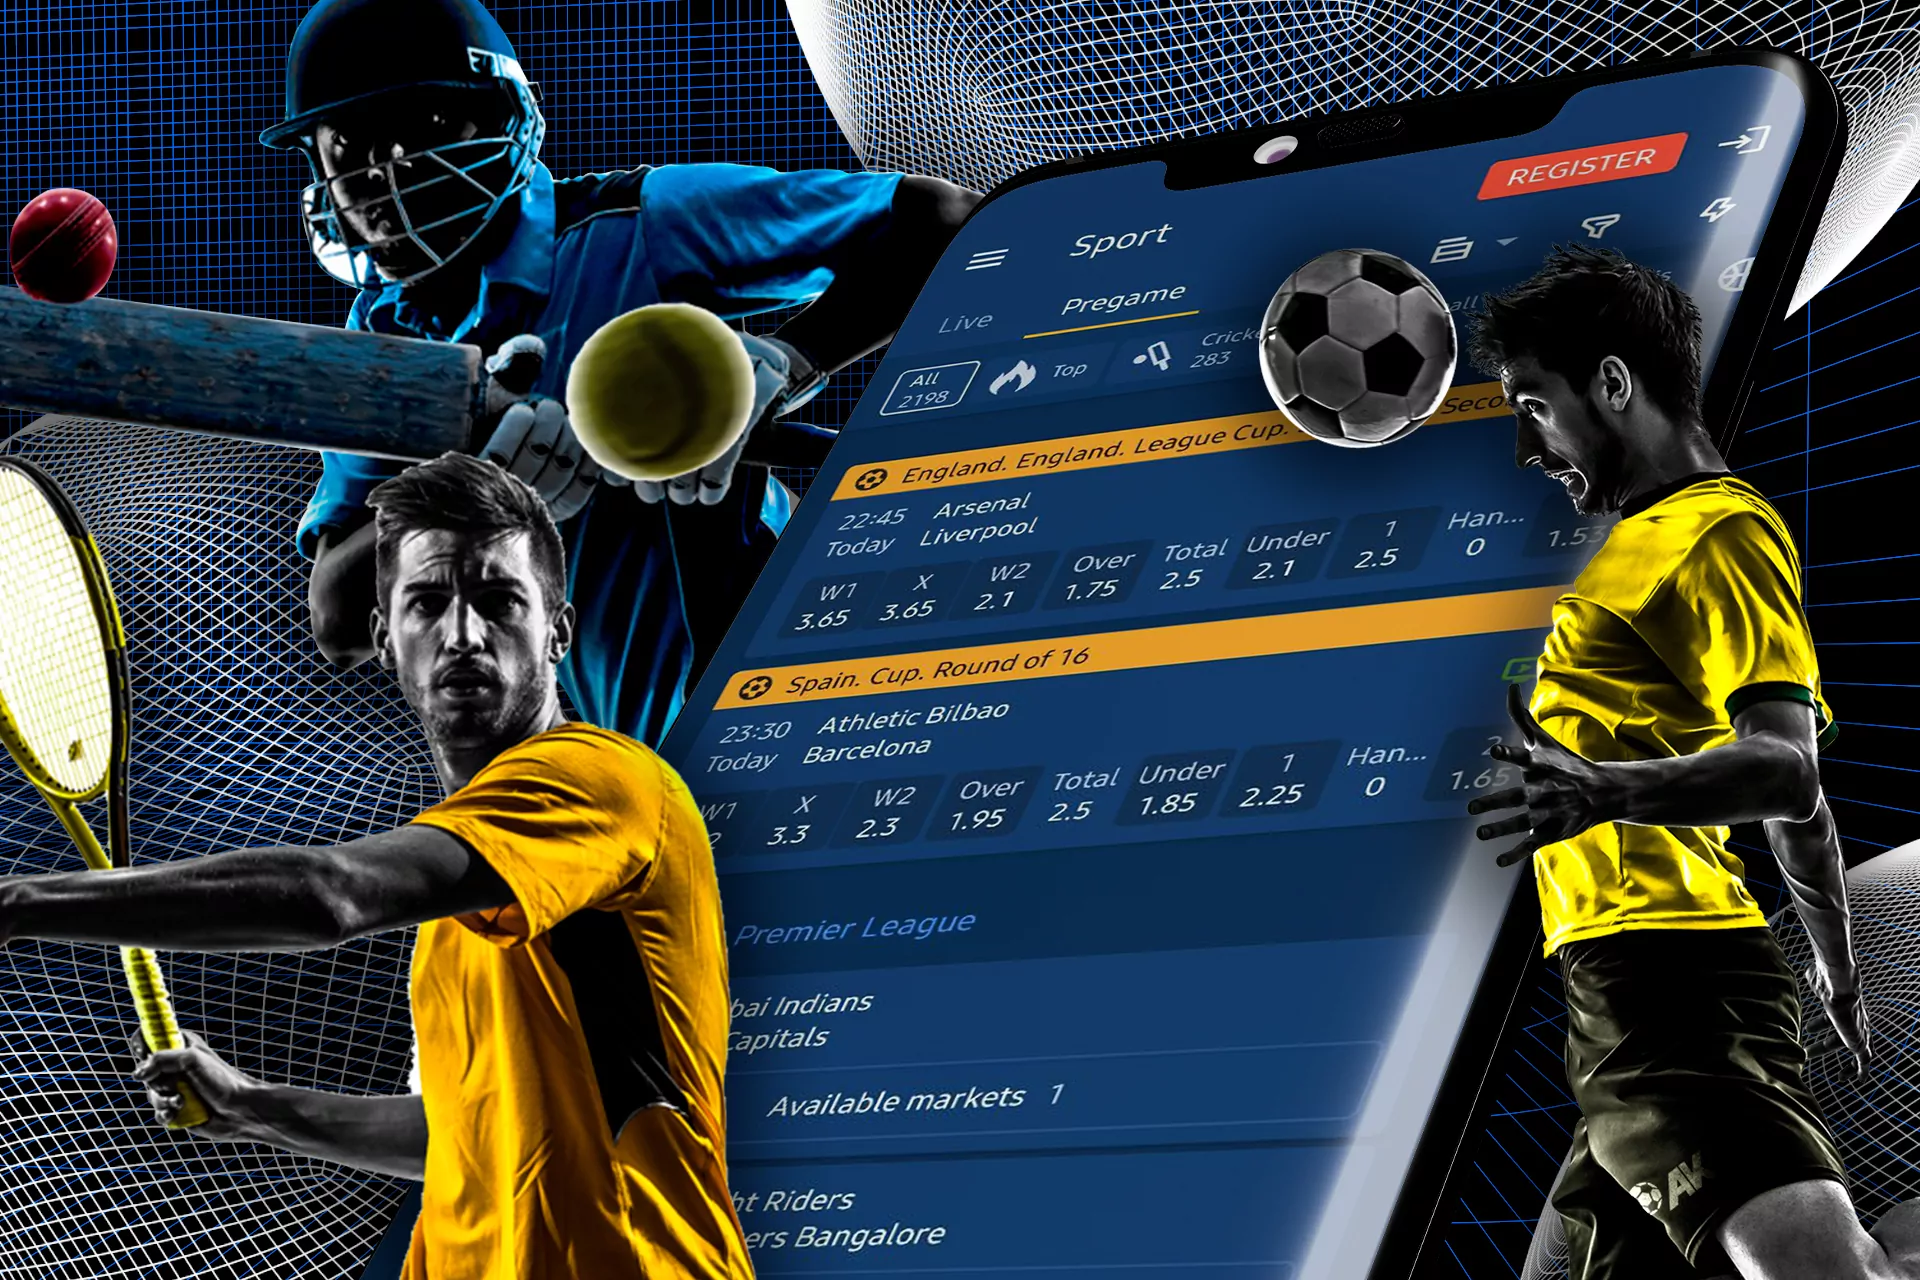 Types of sports betting available to players through the app.